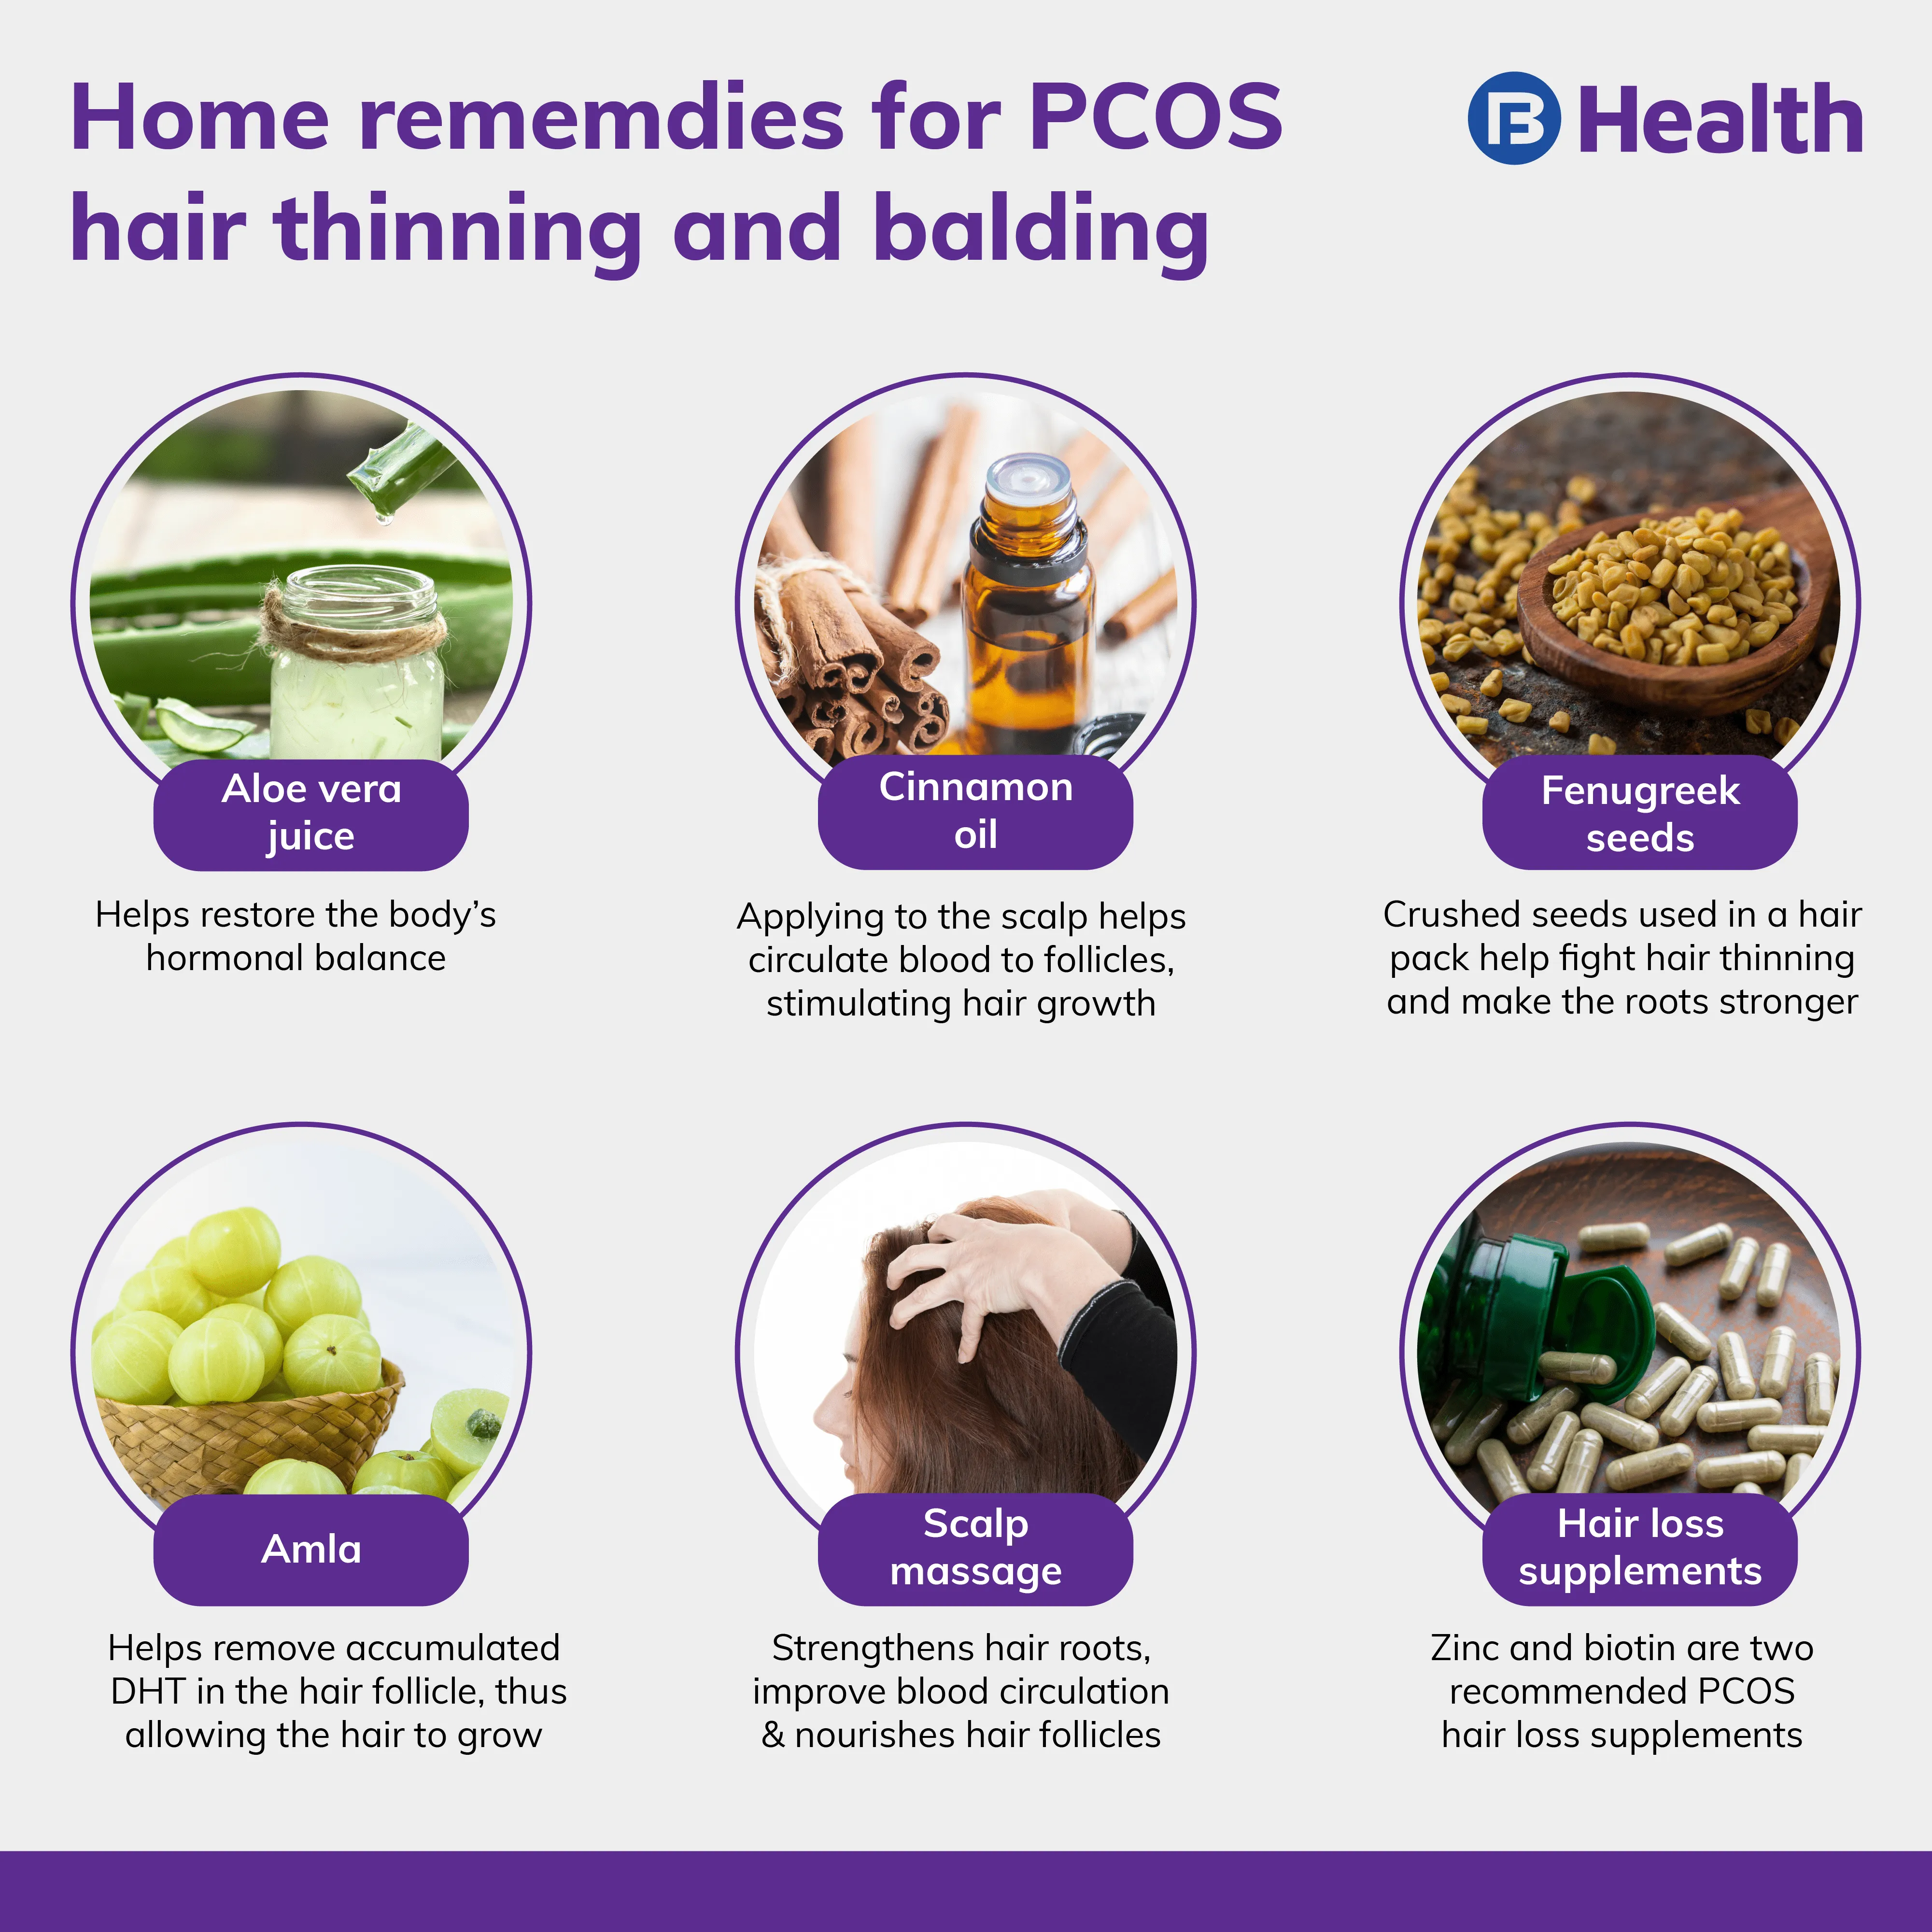 PCOS Hair Loss: How To Defeat It? - MyHealthGuide